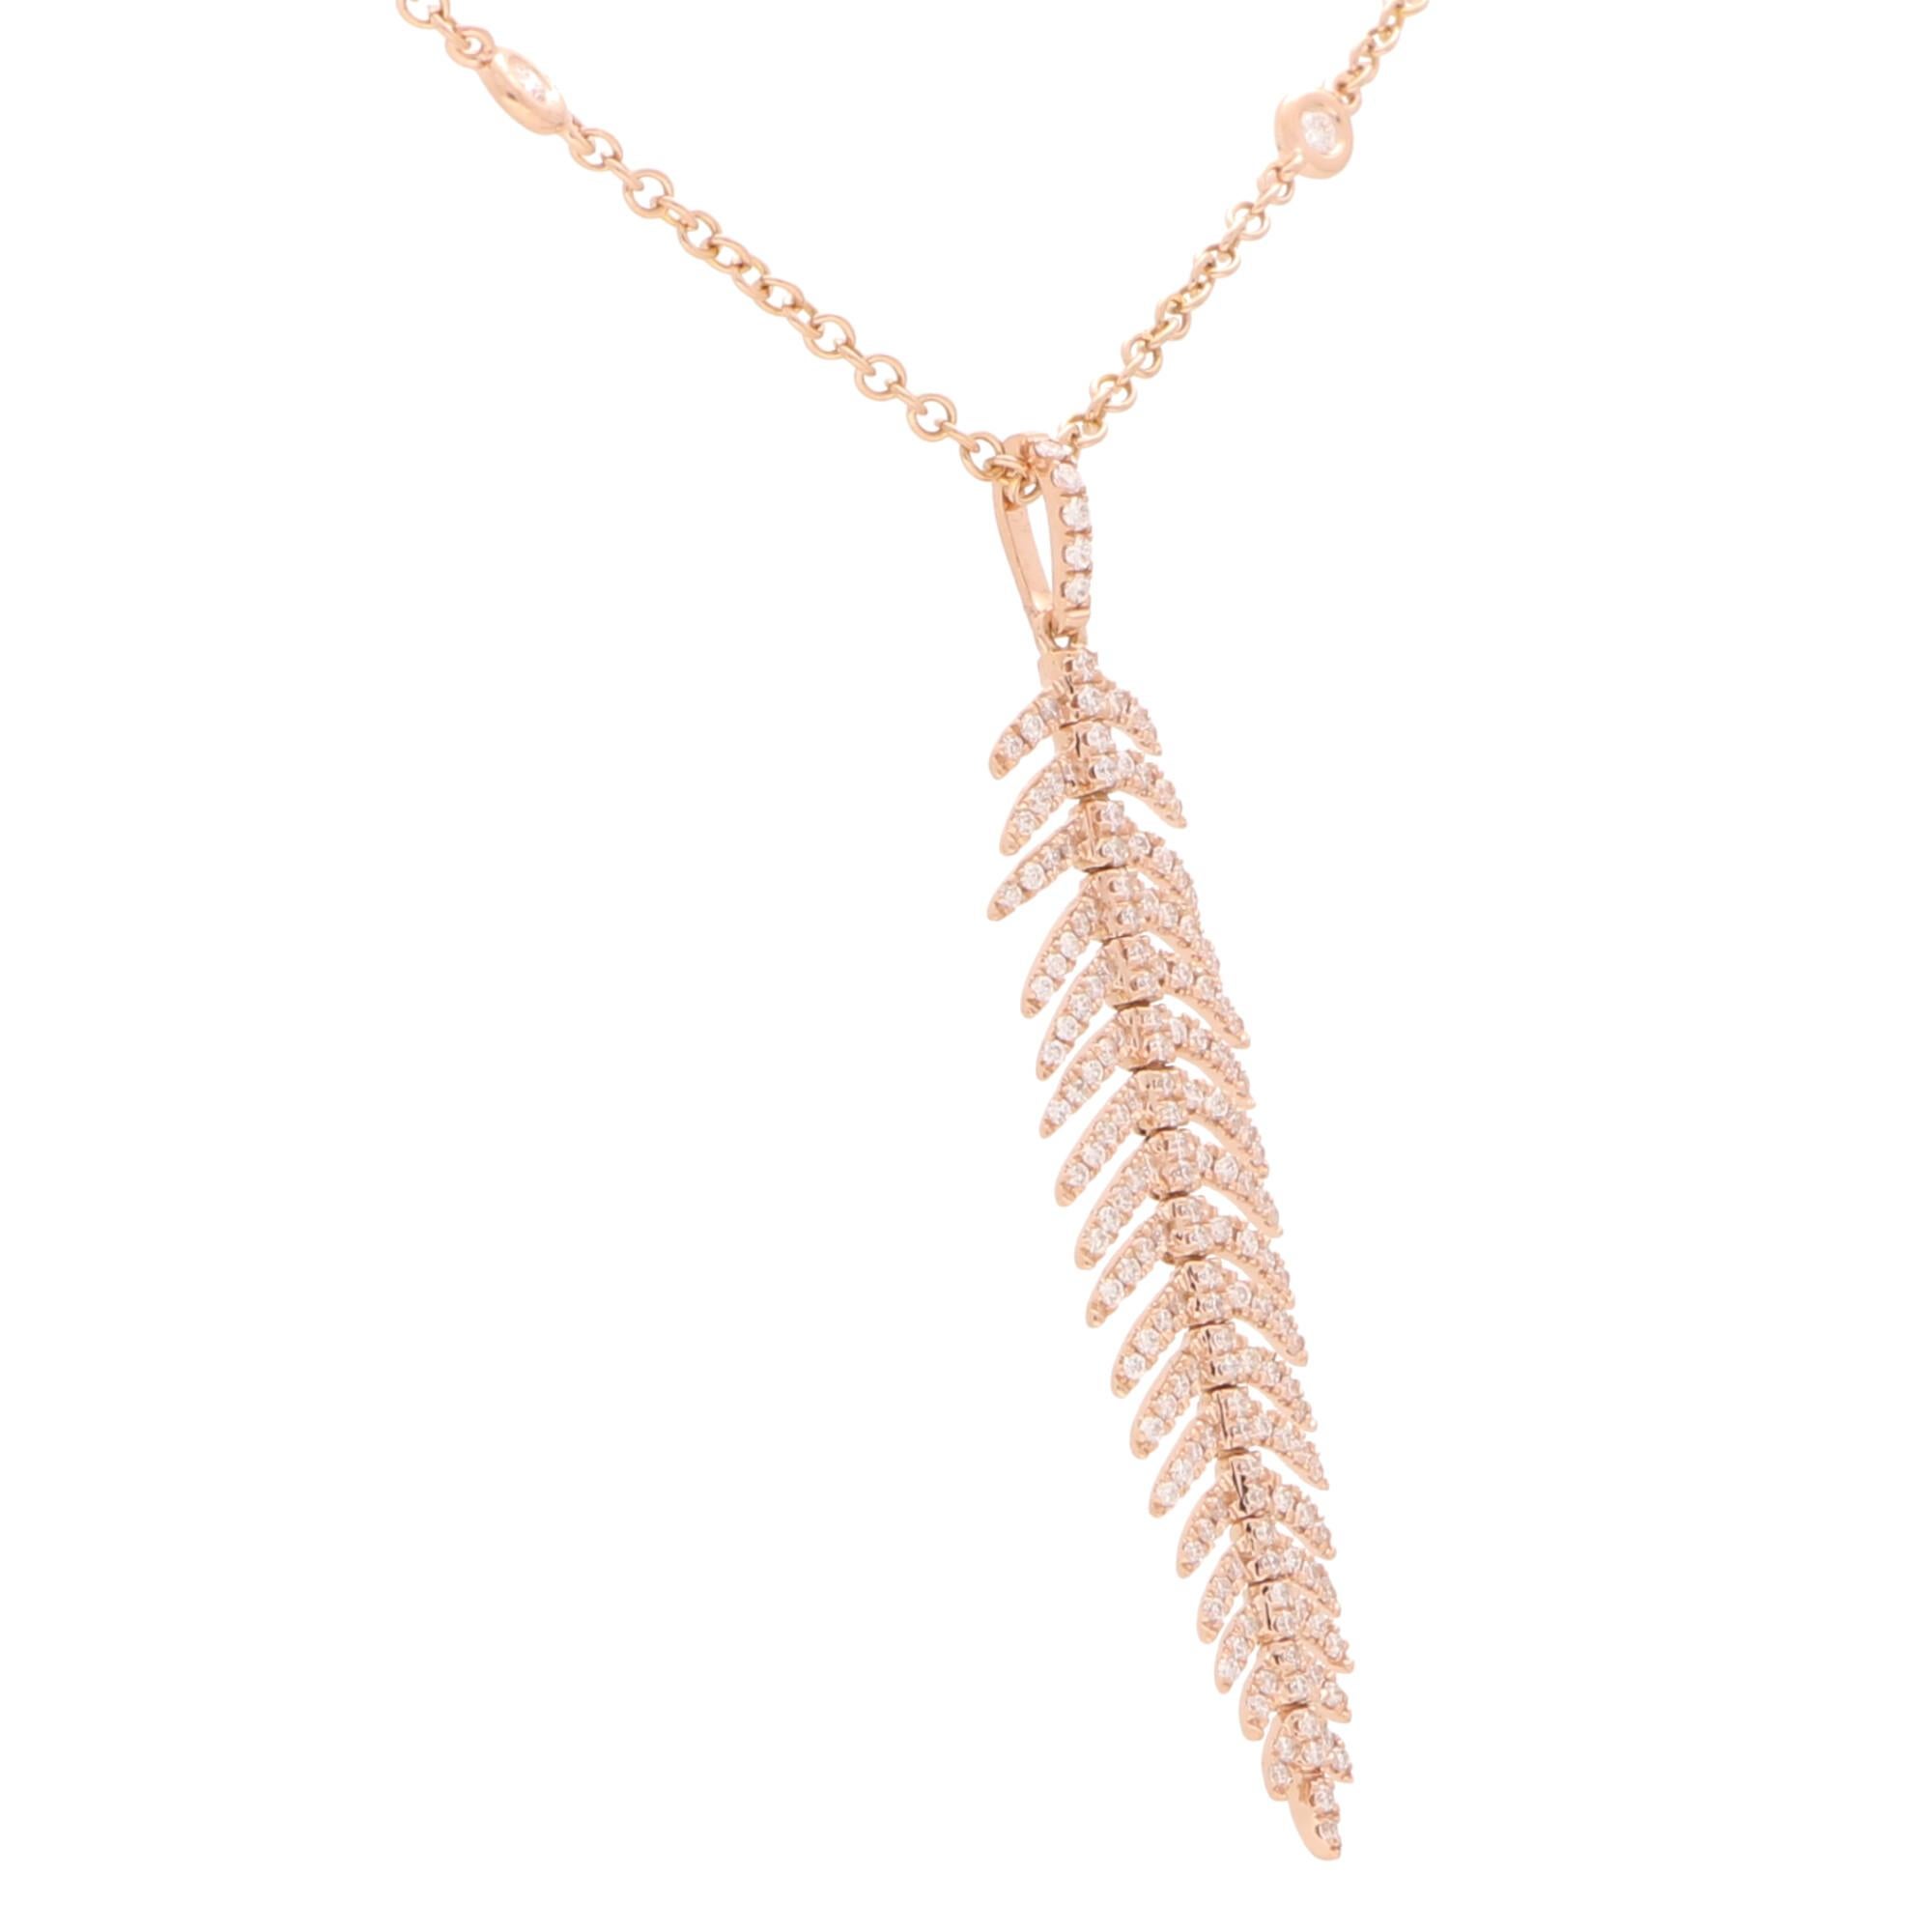 An extremely elegant articulated feather pendant on a diamond spectacle chain set in 18k rose gold.

The central pendant depicts a beautiful sparkly feather which is articulated and claw-set throughout with round brilliant-cut diamonds. Each feather